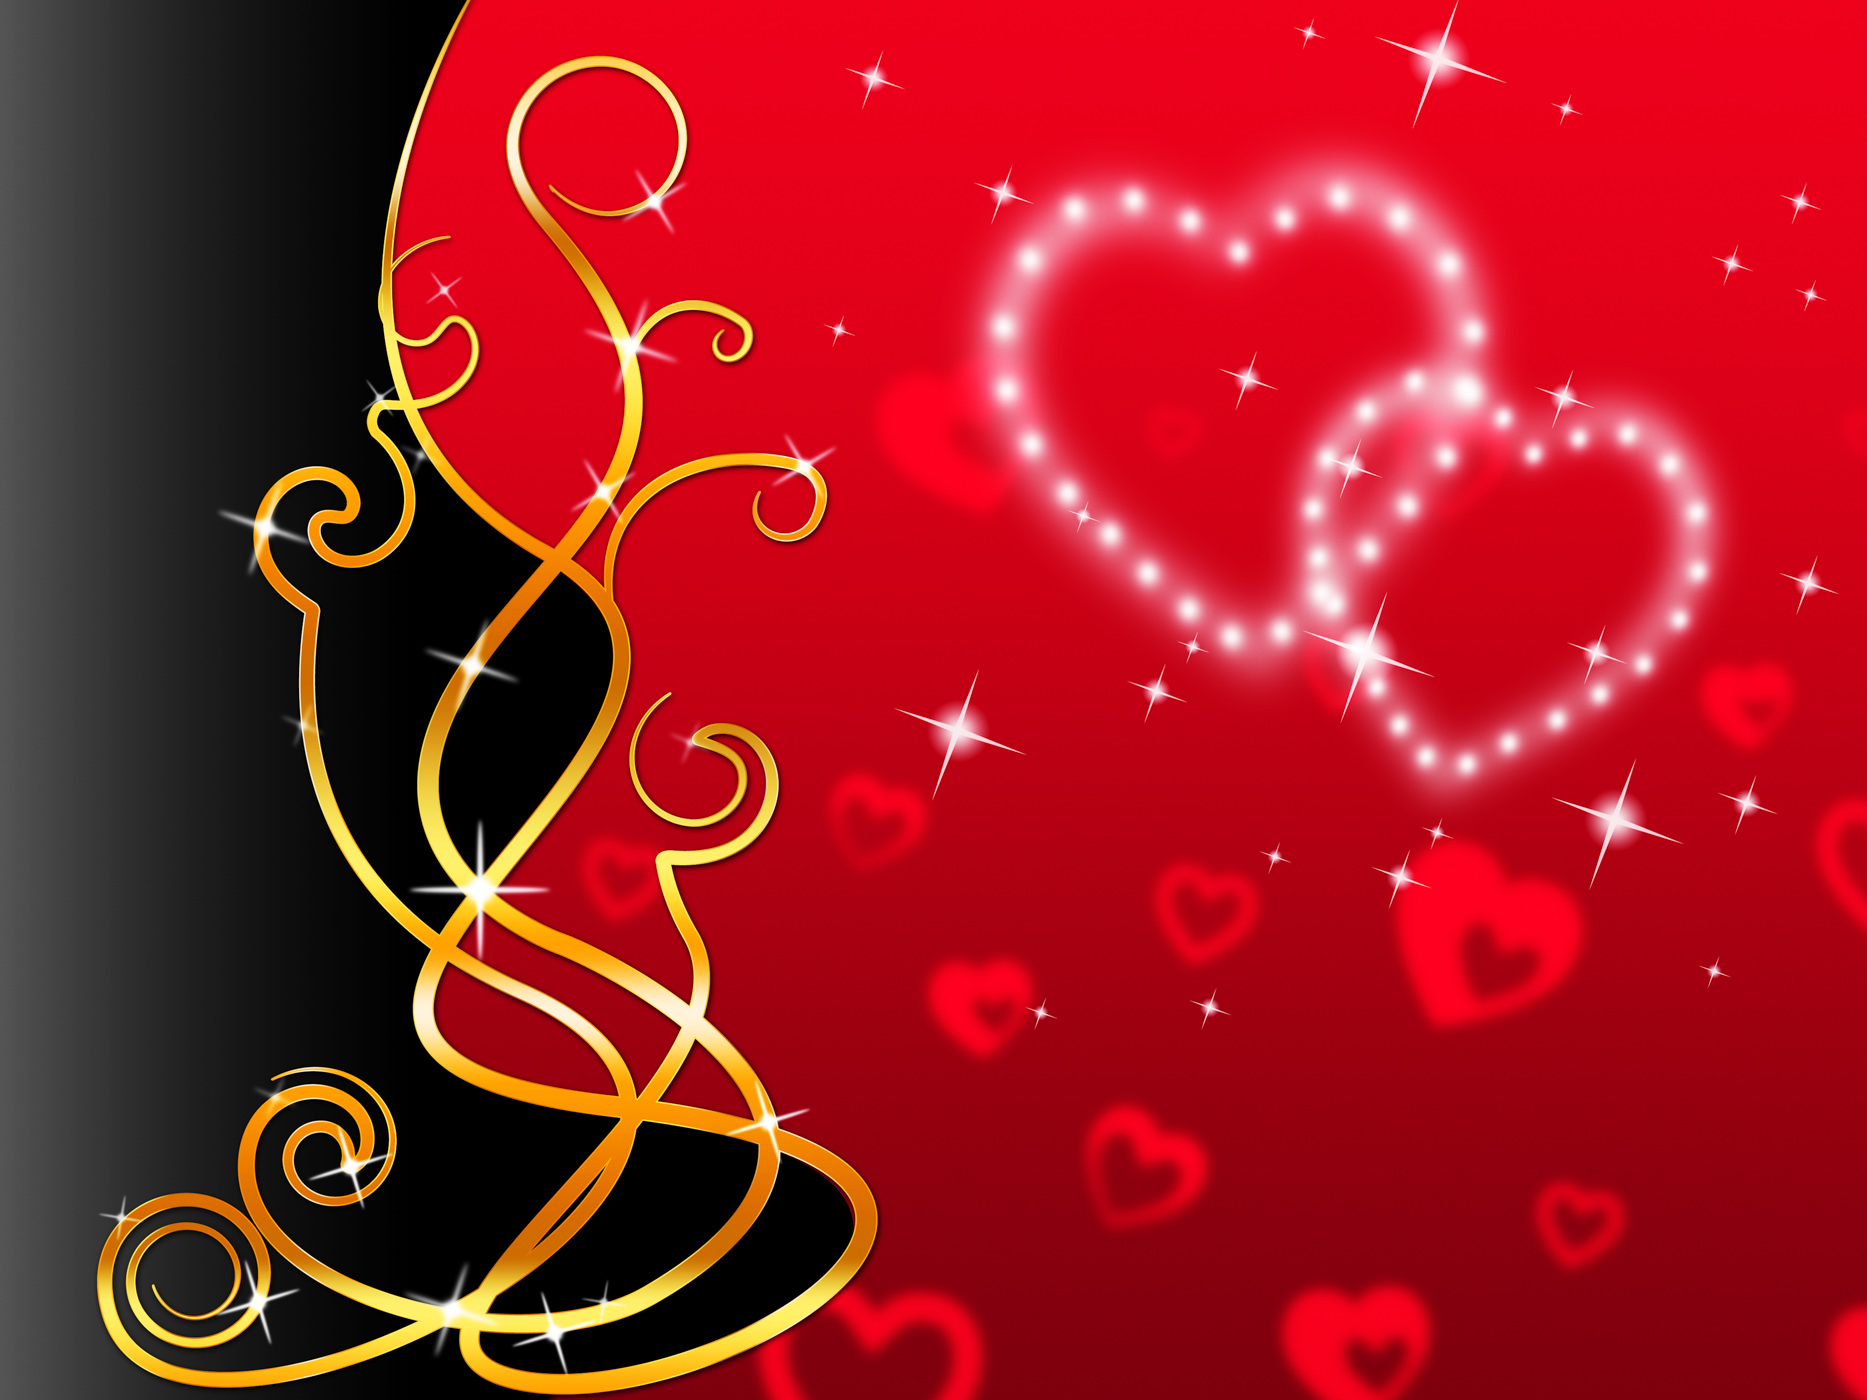 Red hearts background means love dear and floral photo